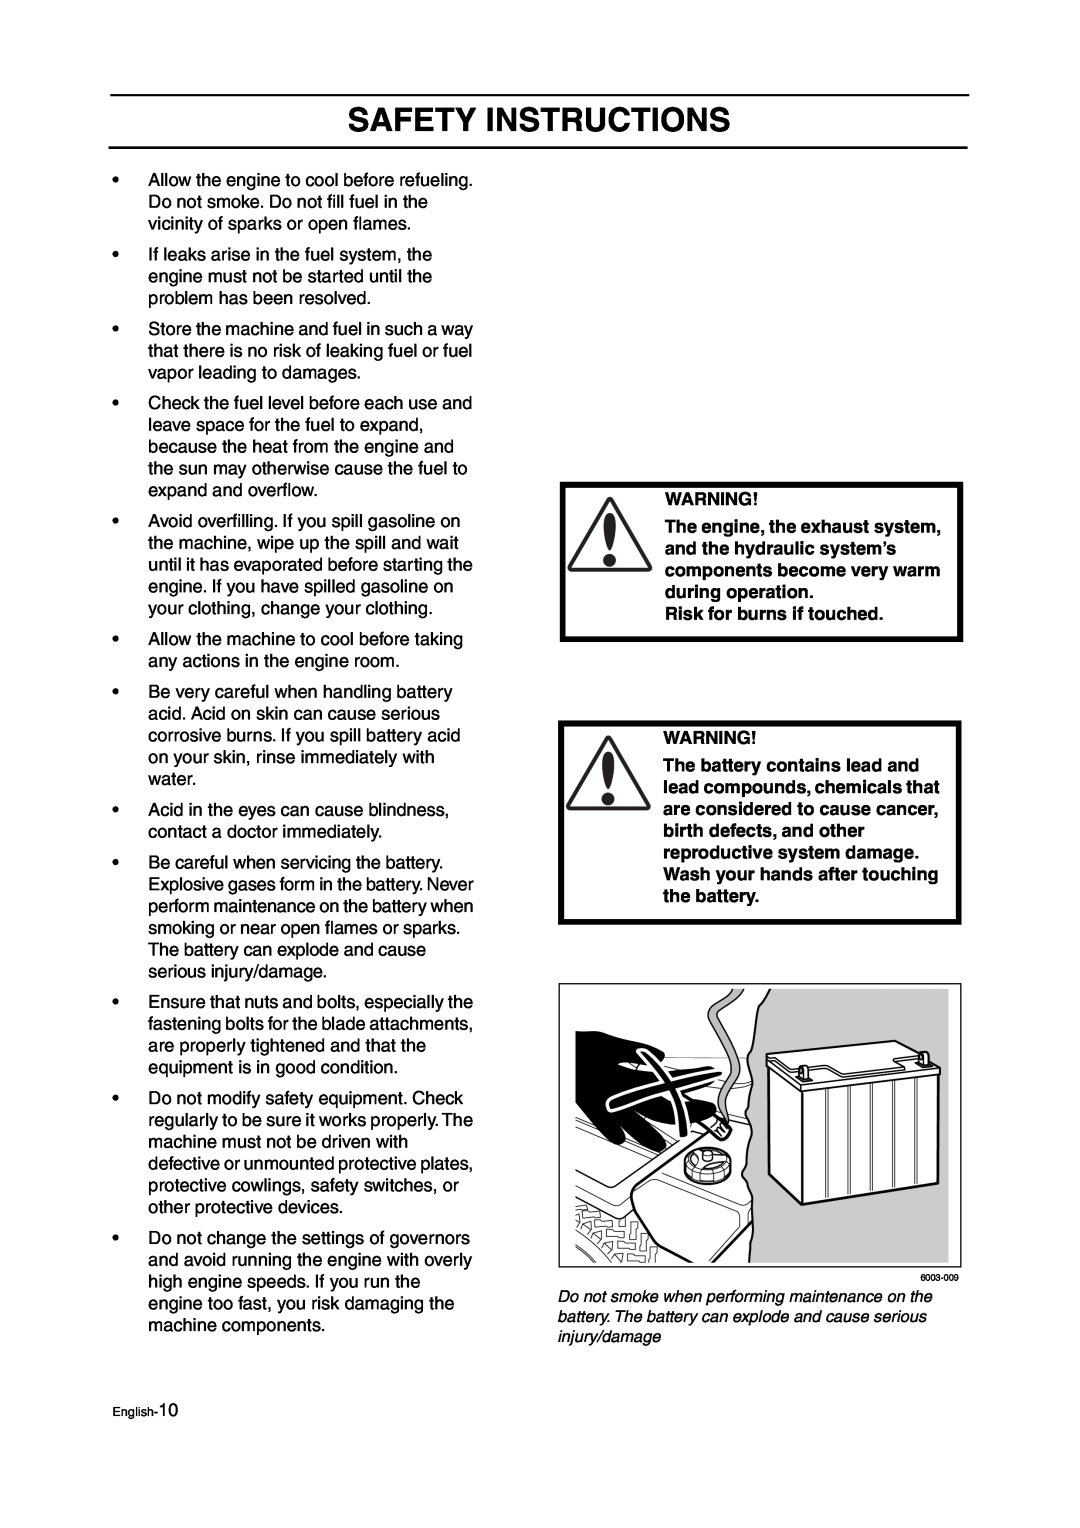 Husqvarna ZTH manual Risk for burns if touched, Safety Instructions 